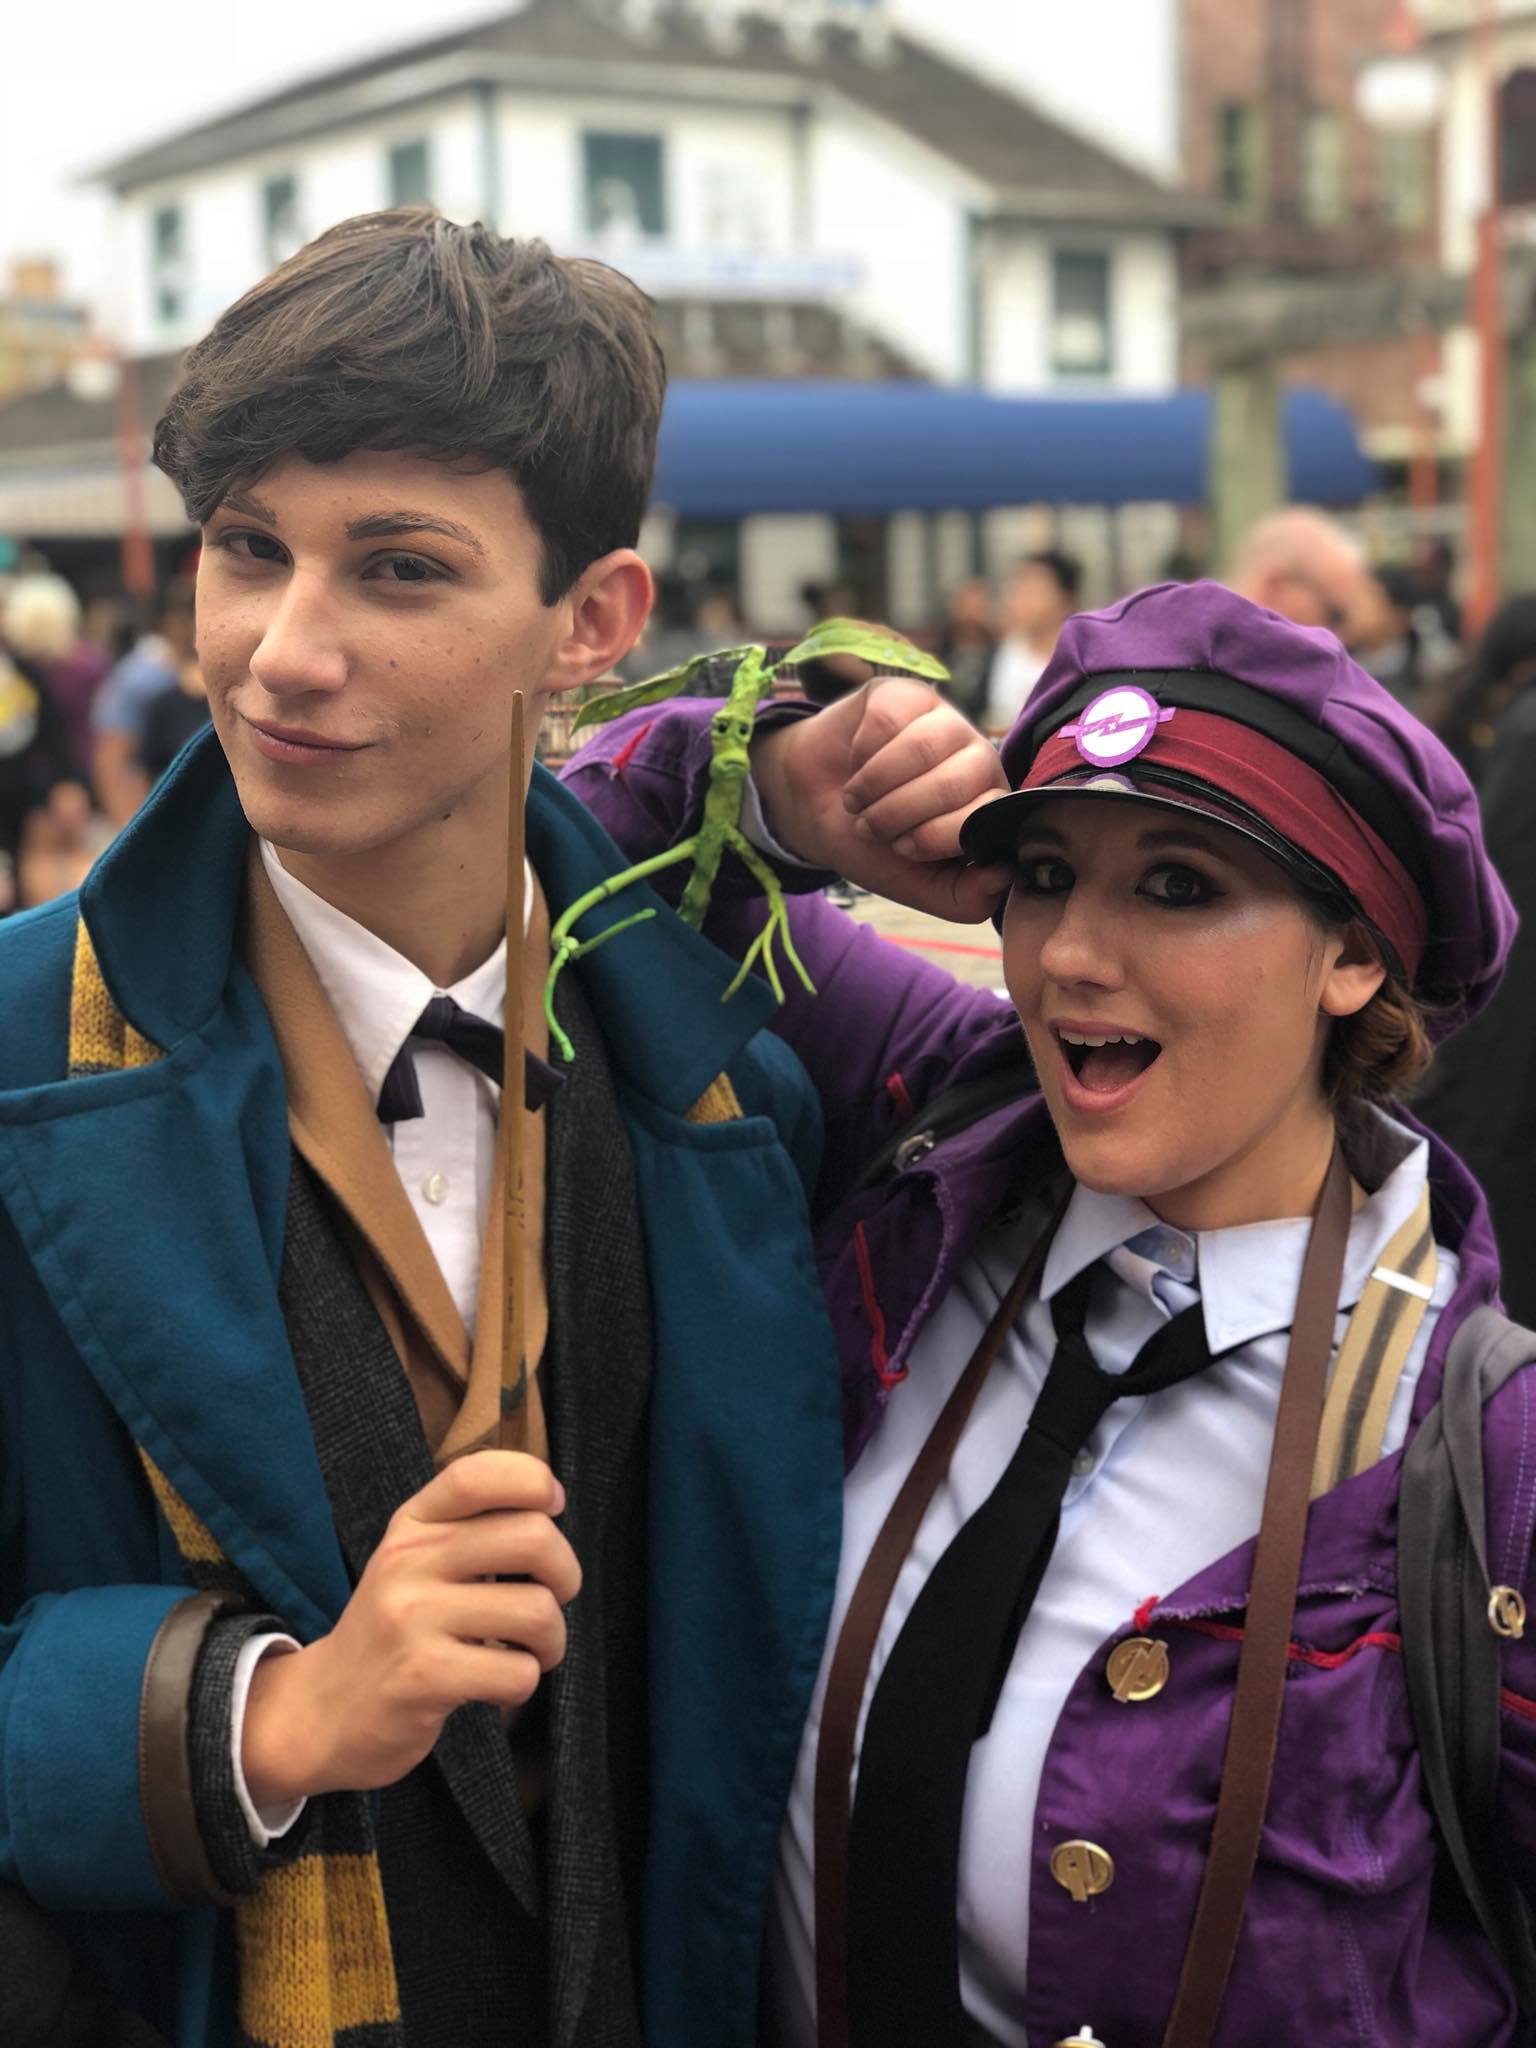 Magical Cosplay from A Celebration of Harry Potter 2017